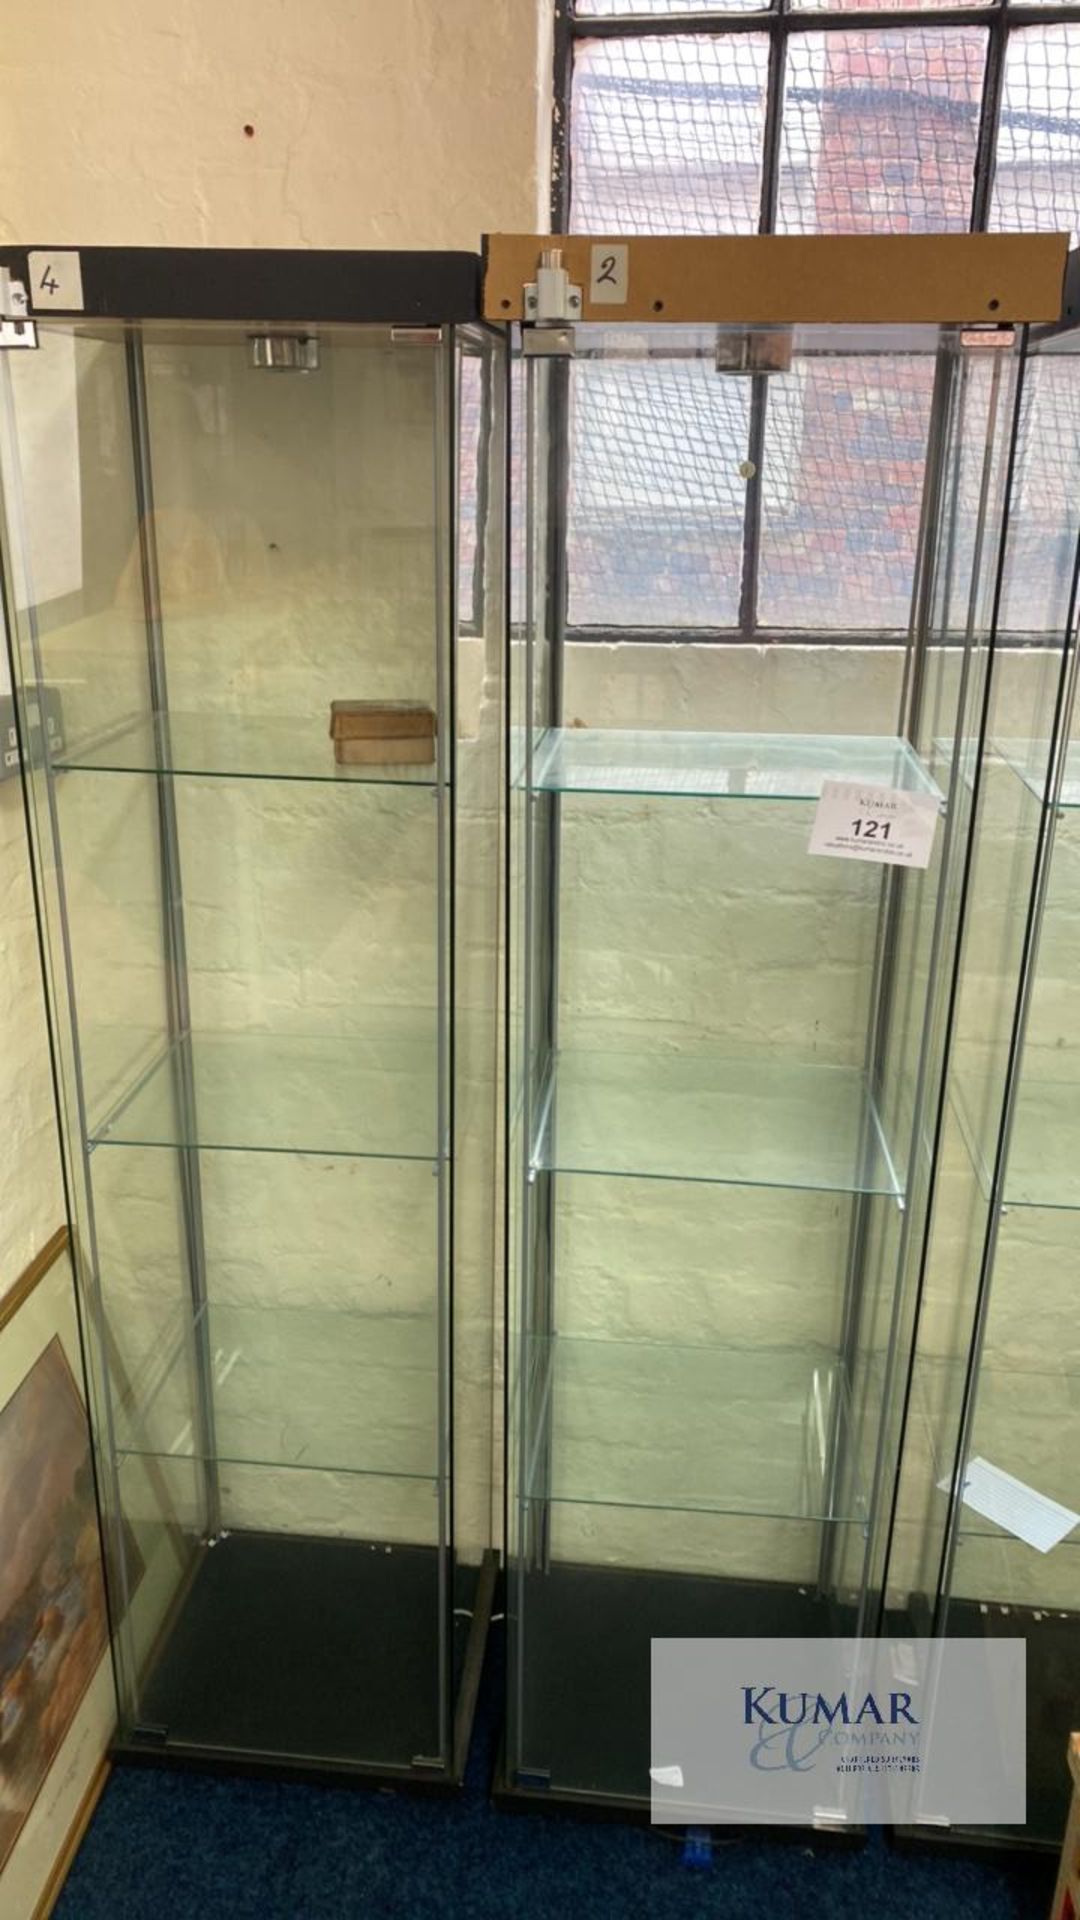 3 Glass Storage Cabinets - Image 2 of 4